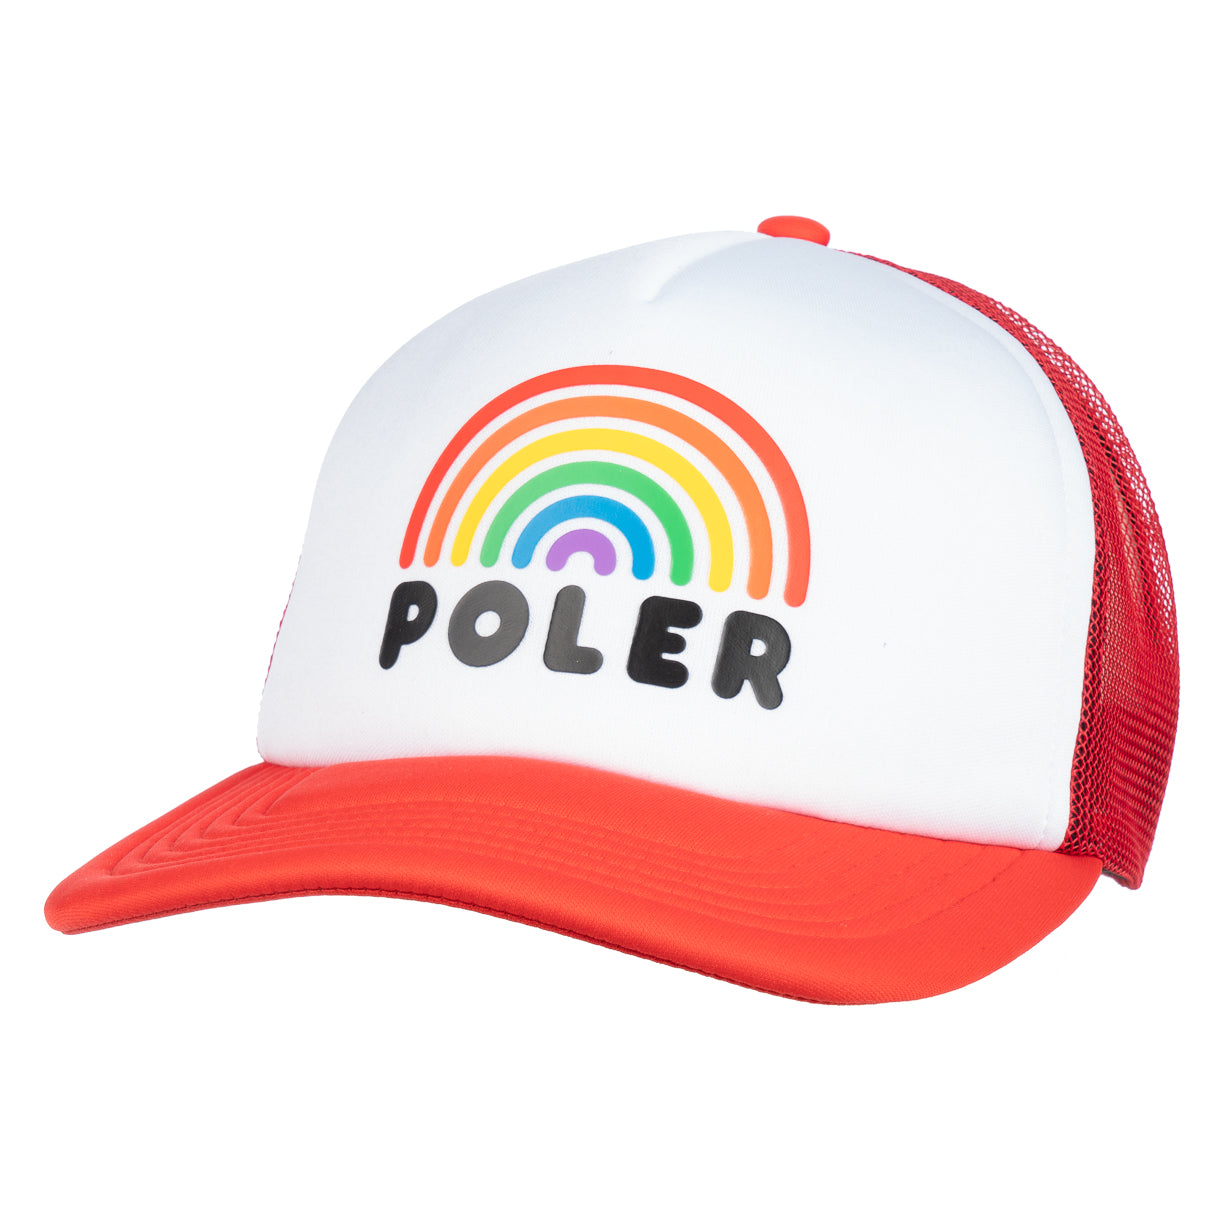 Rainbow Trucker Hat product RED O/S 